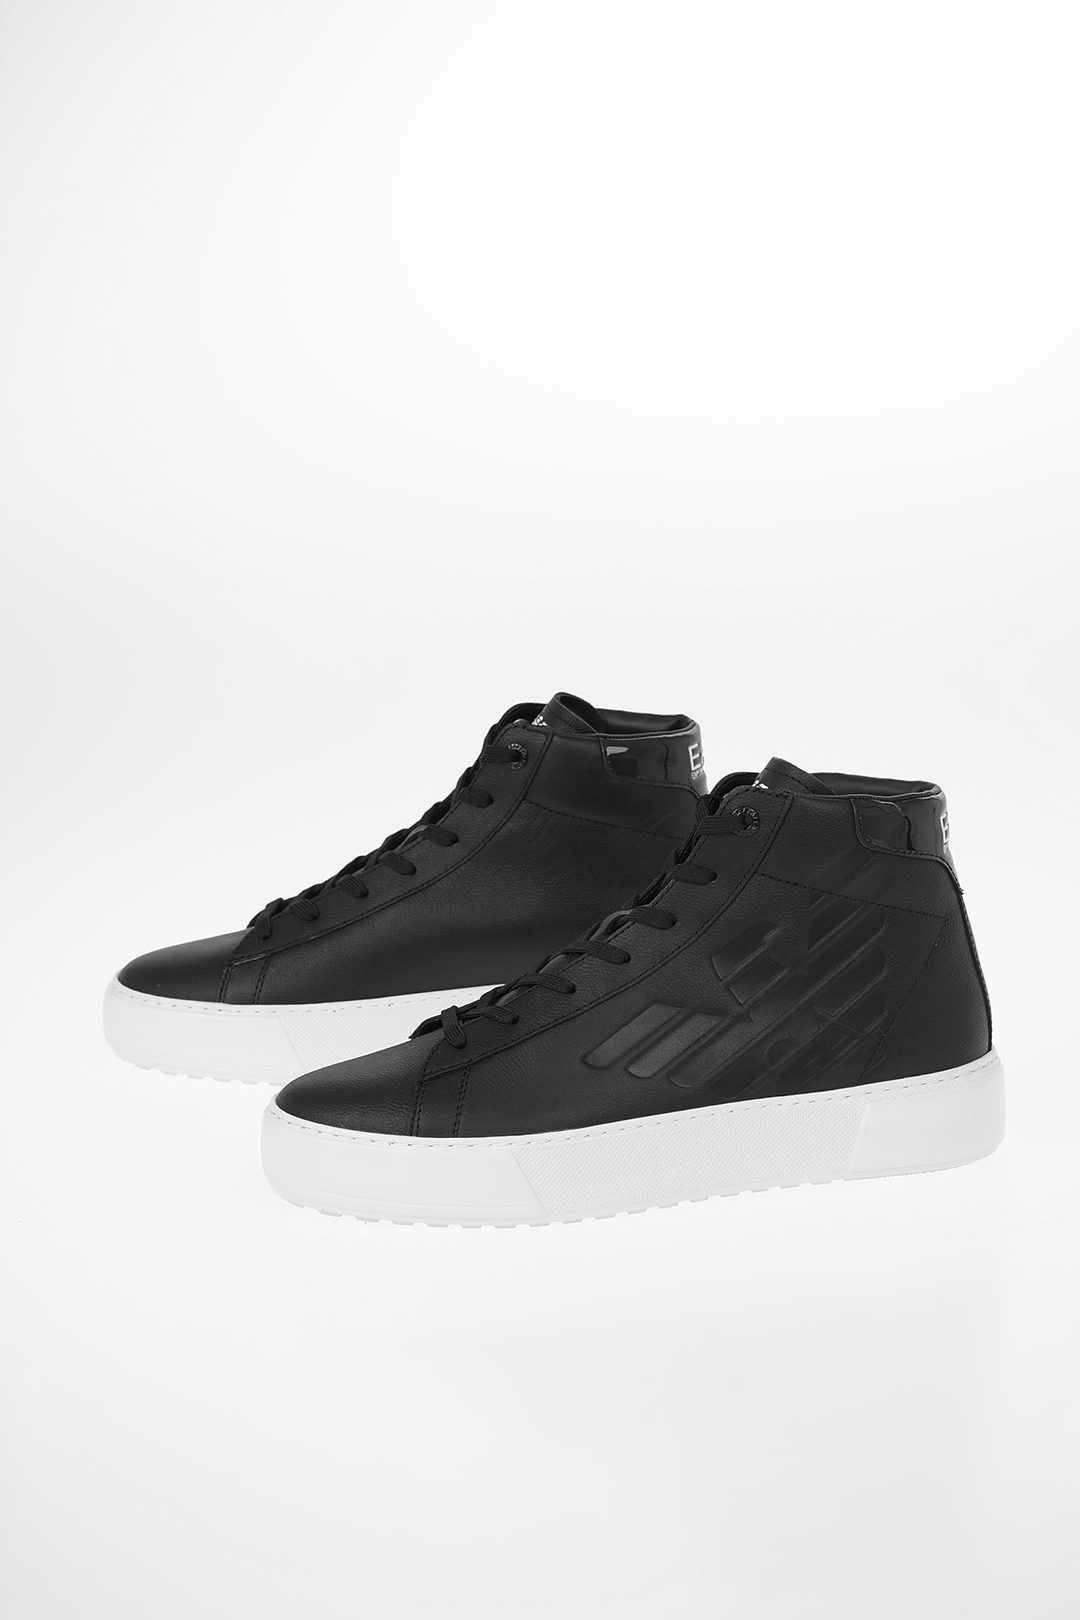 Armani EA7 EMPORIO Leather High Top Sneakers men - Glamood Outlet